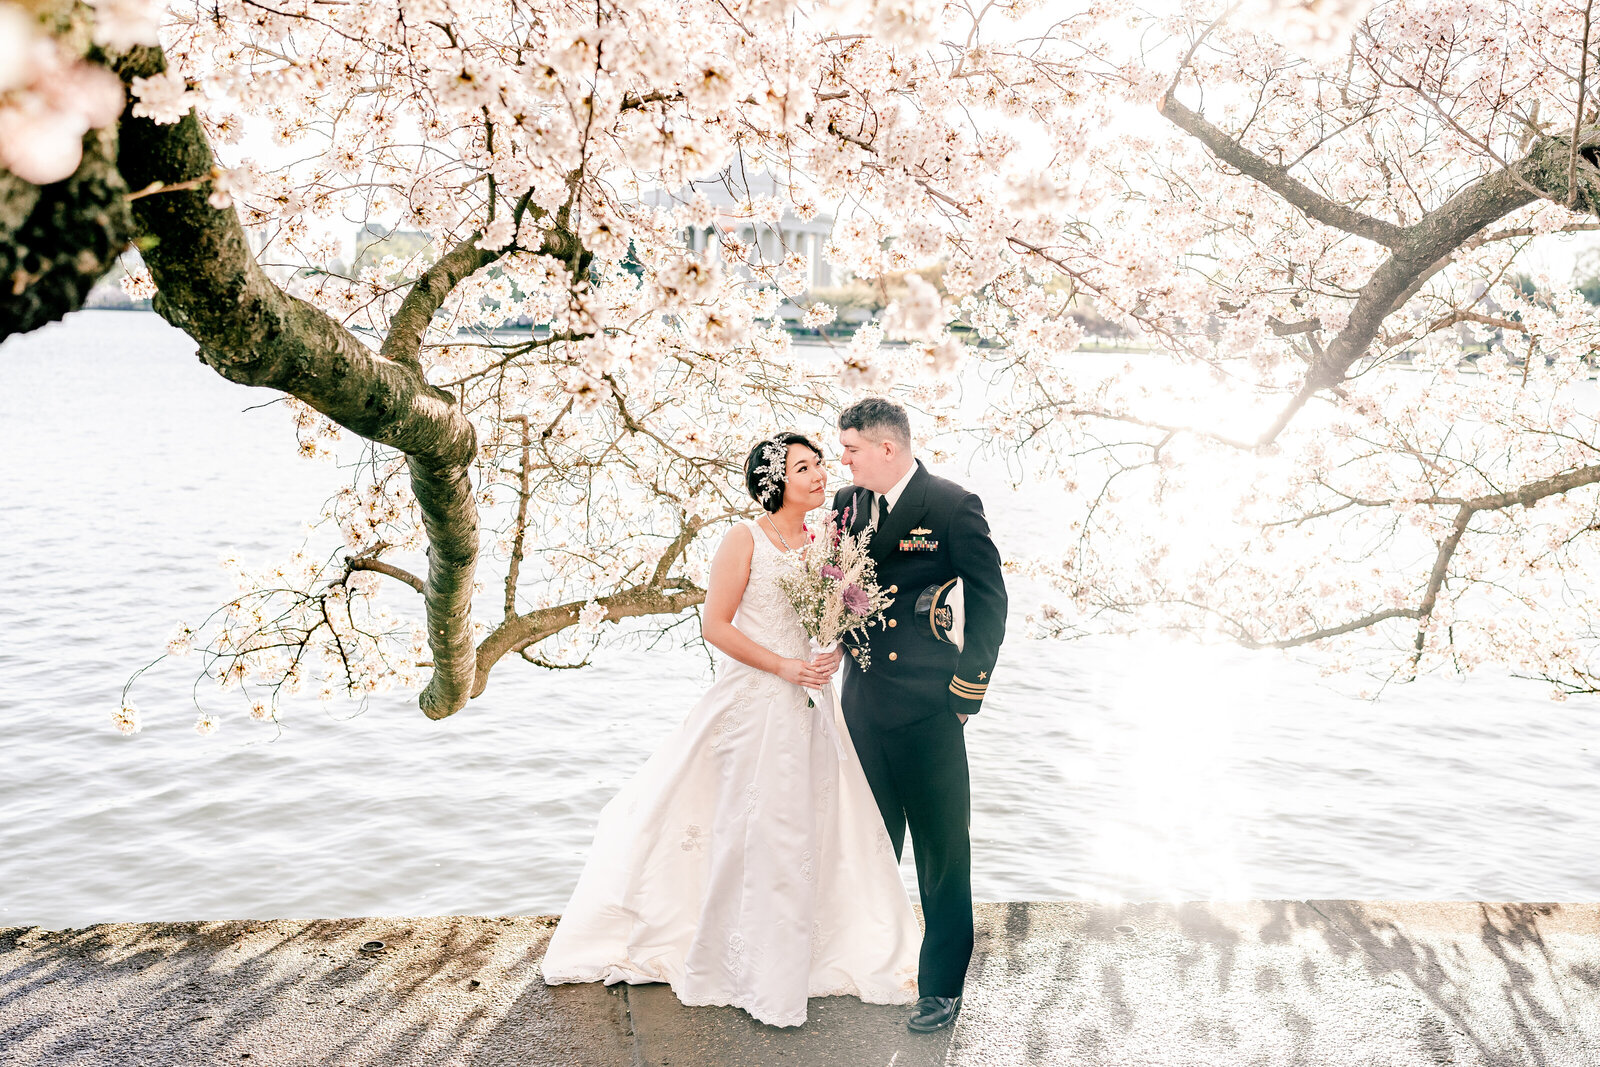 A bride and groom smile at each other underneath the trees for cherry blossom portraits in Washington DC